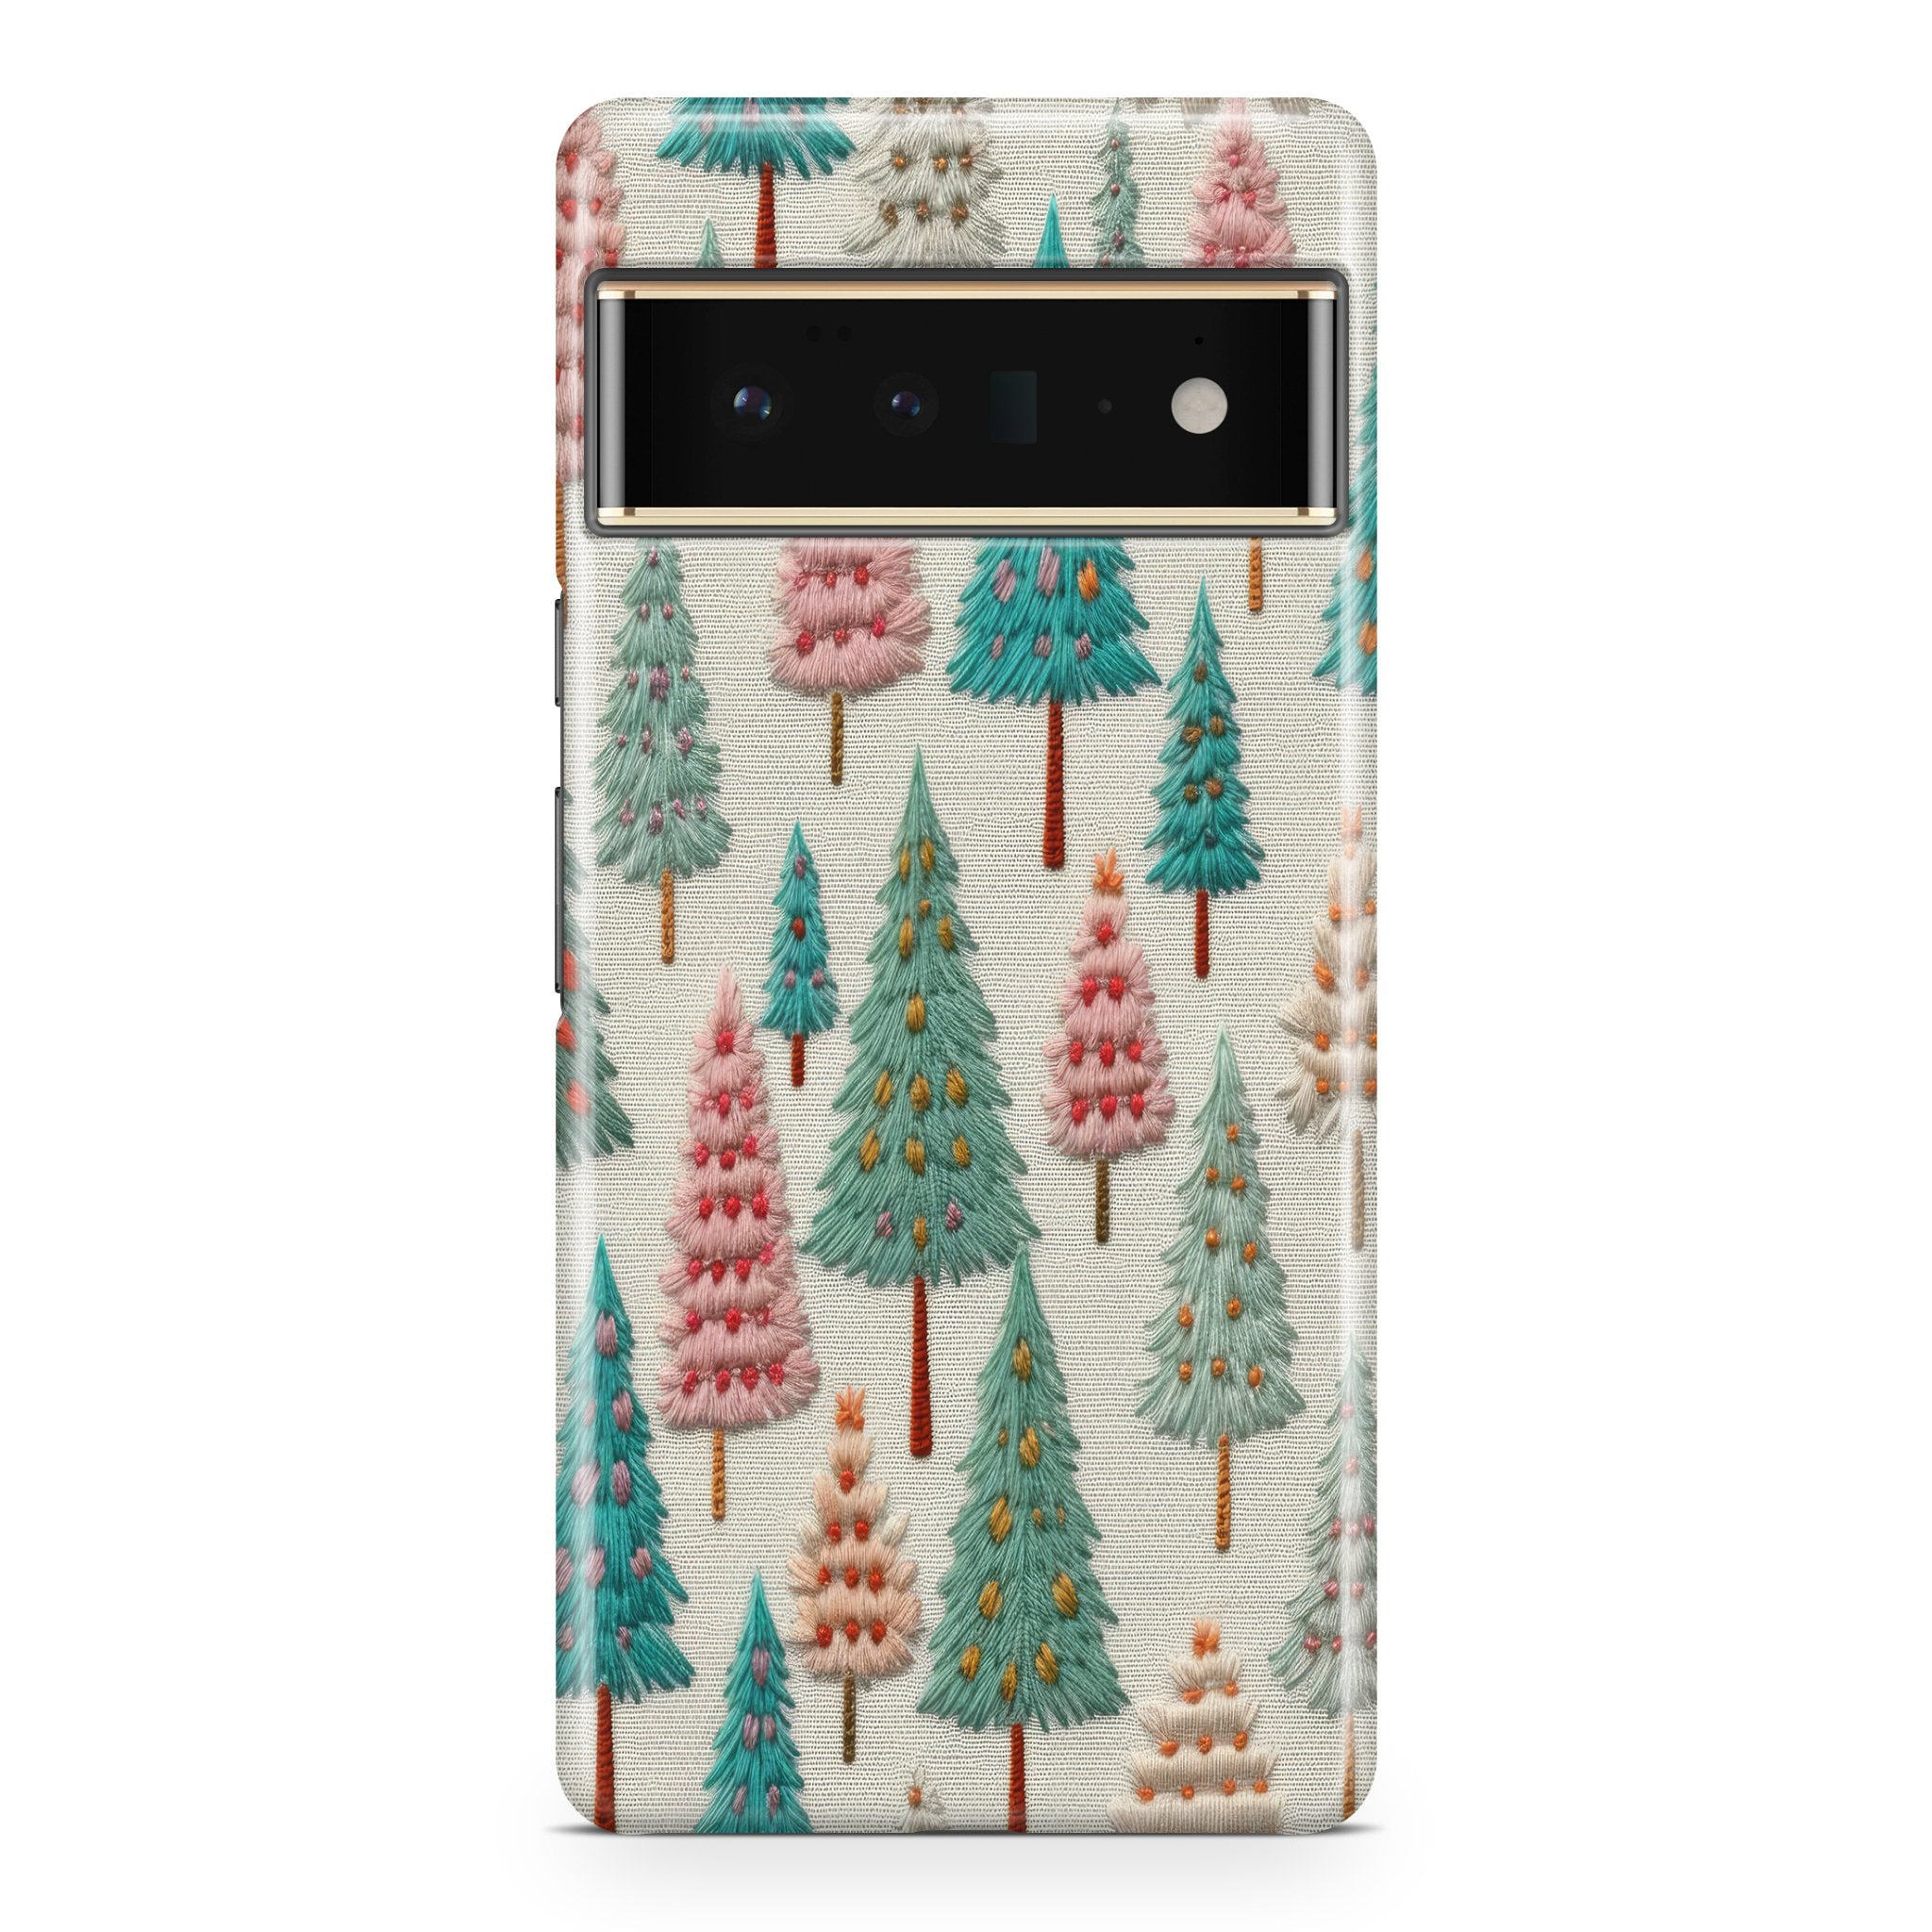 Christmas Trees - Google phone case designs by CaseSwagger